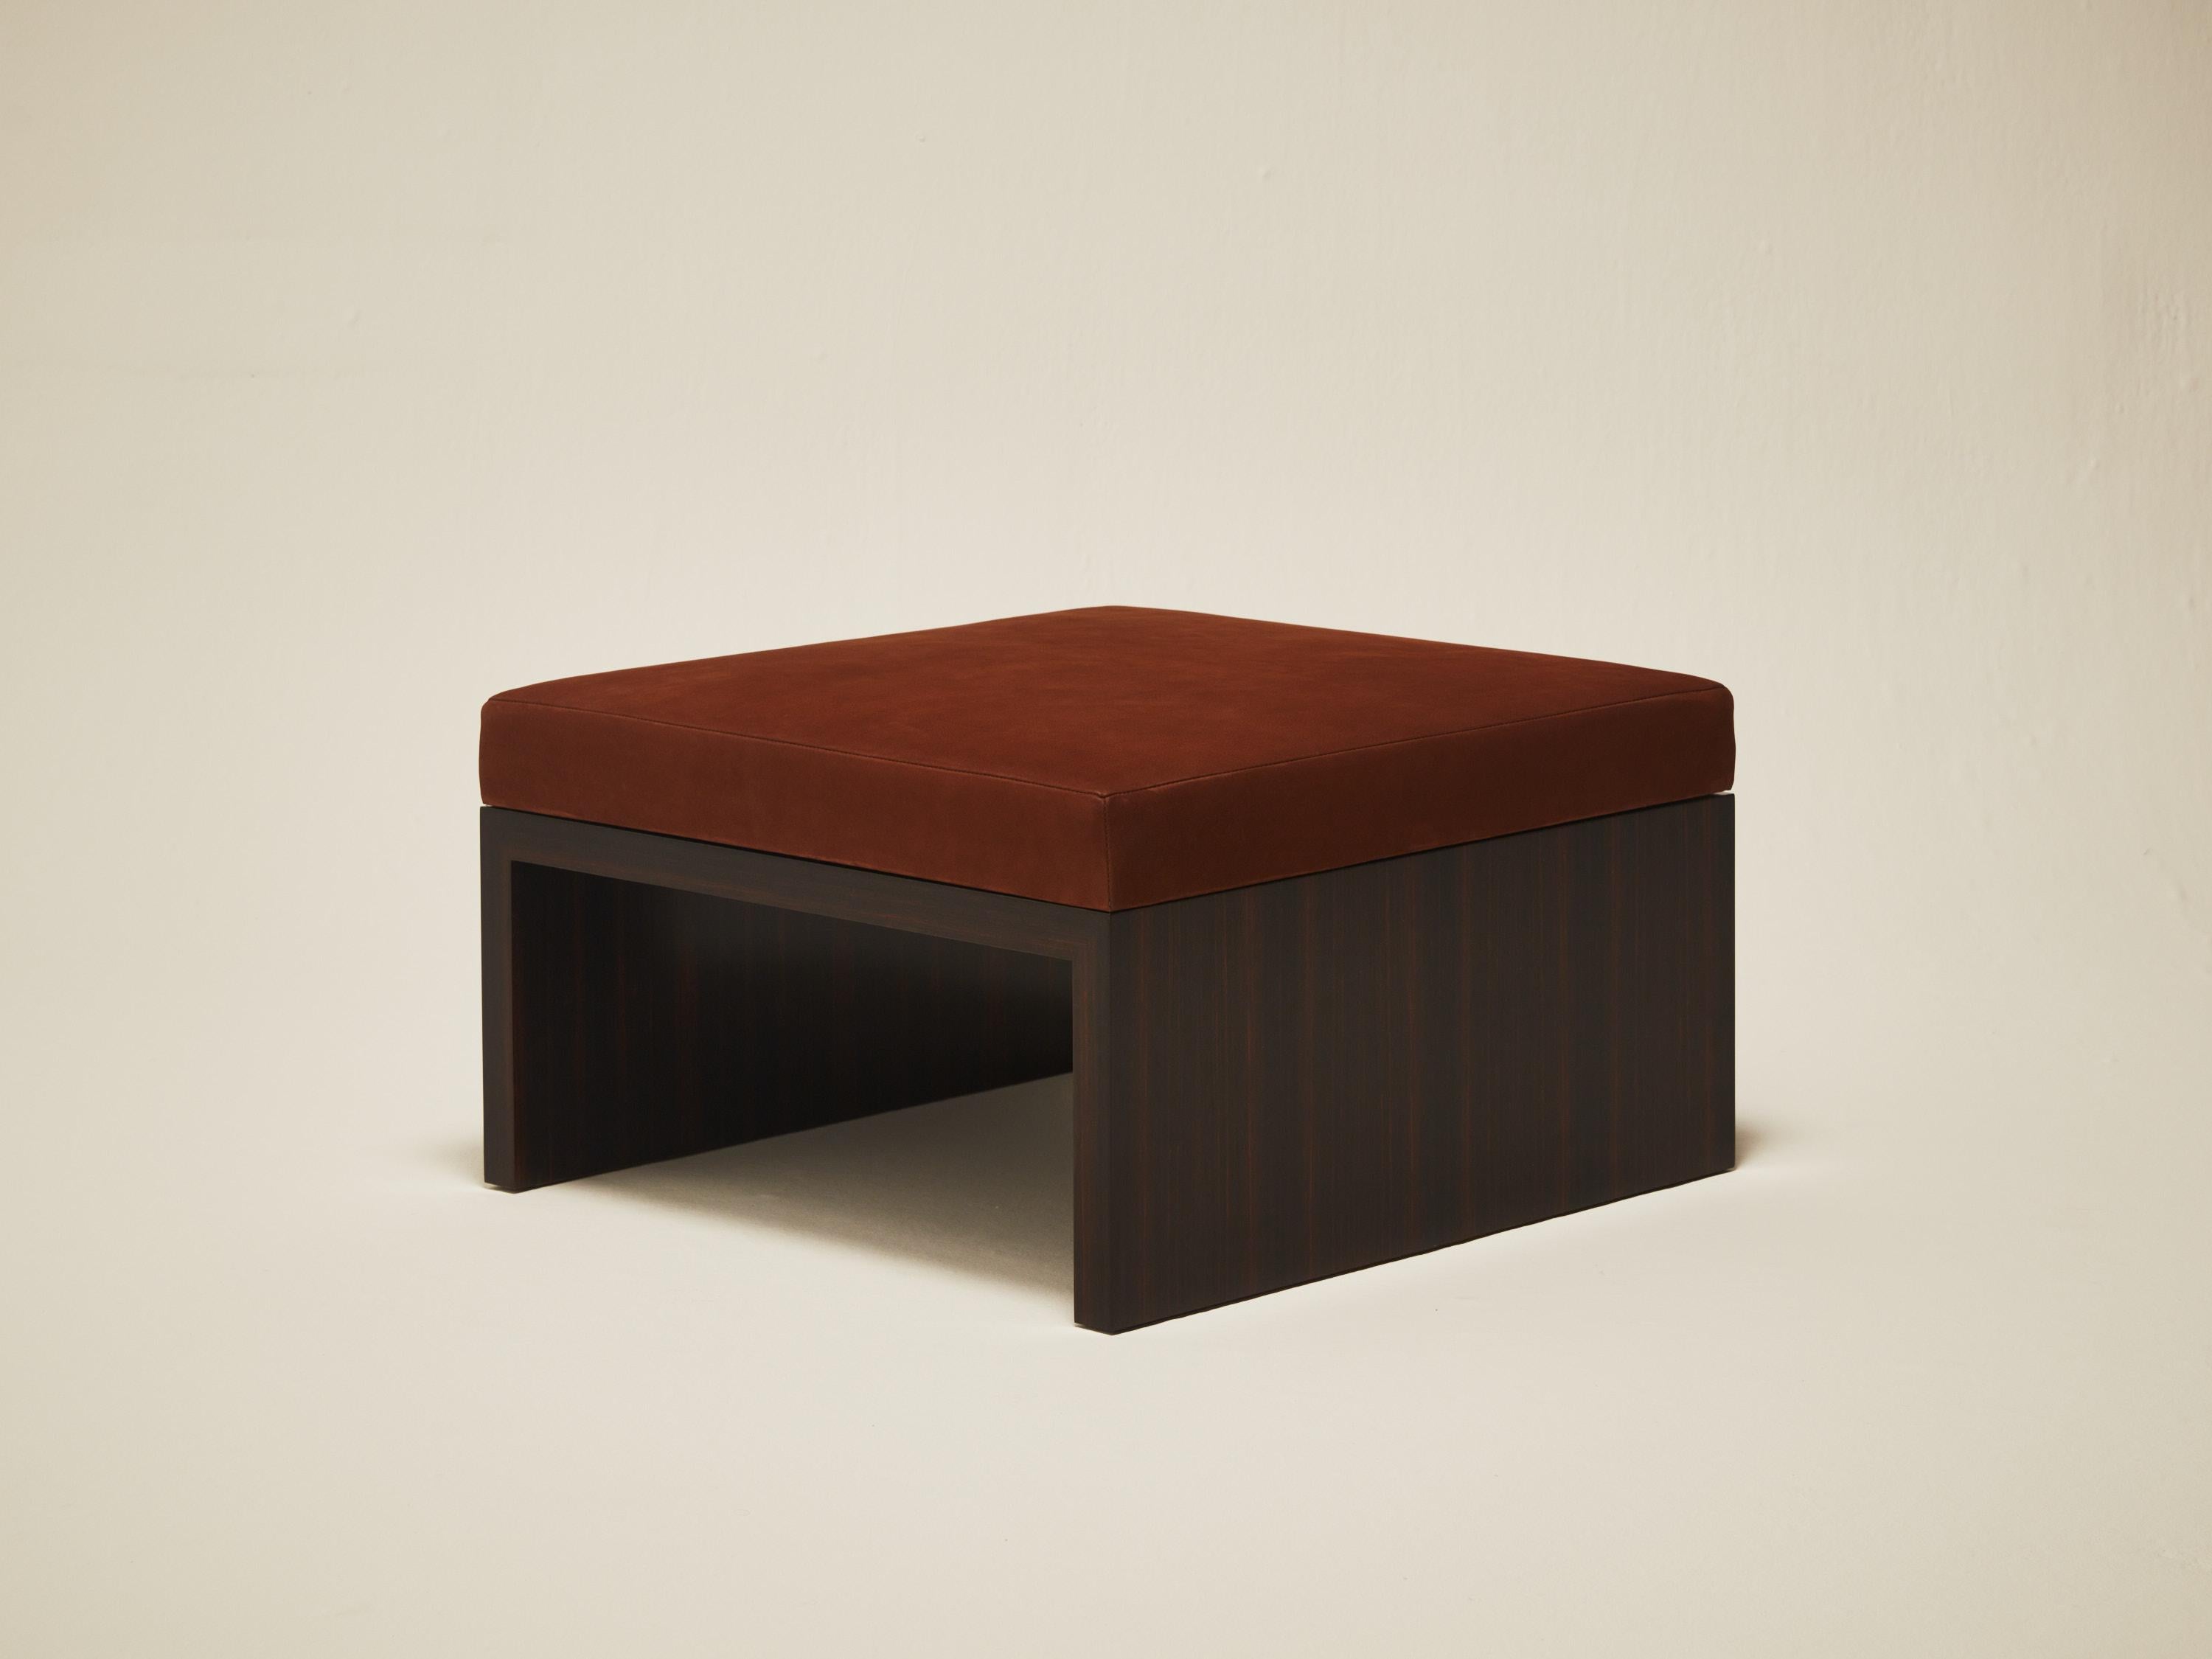 Veneer Continuous Ottoman - Hand applied wood veneer & leather upholstery For Sale